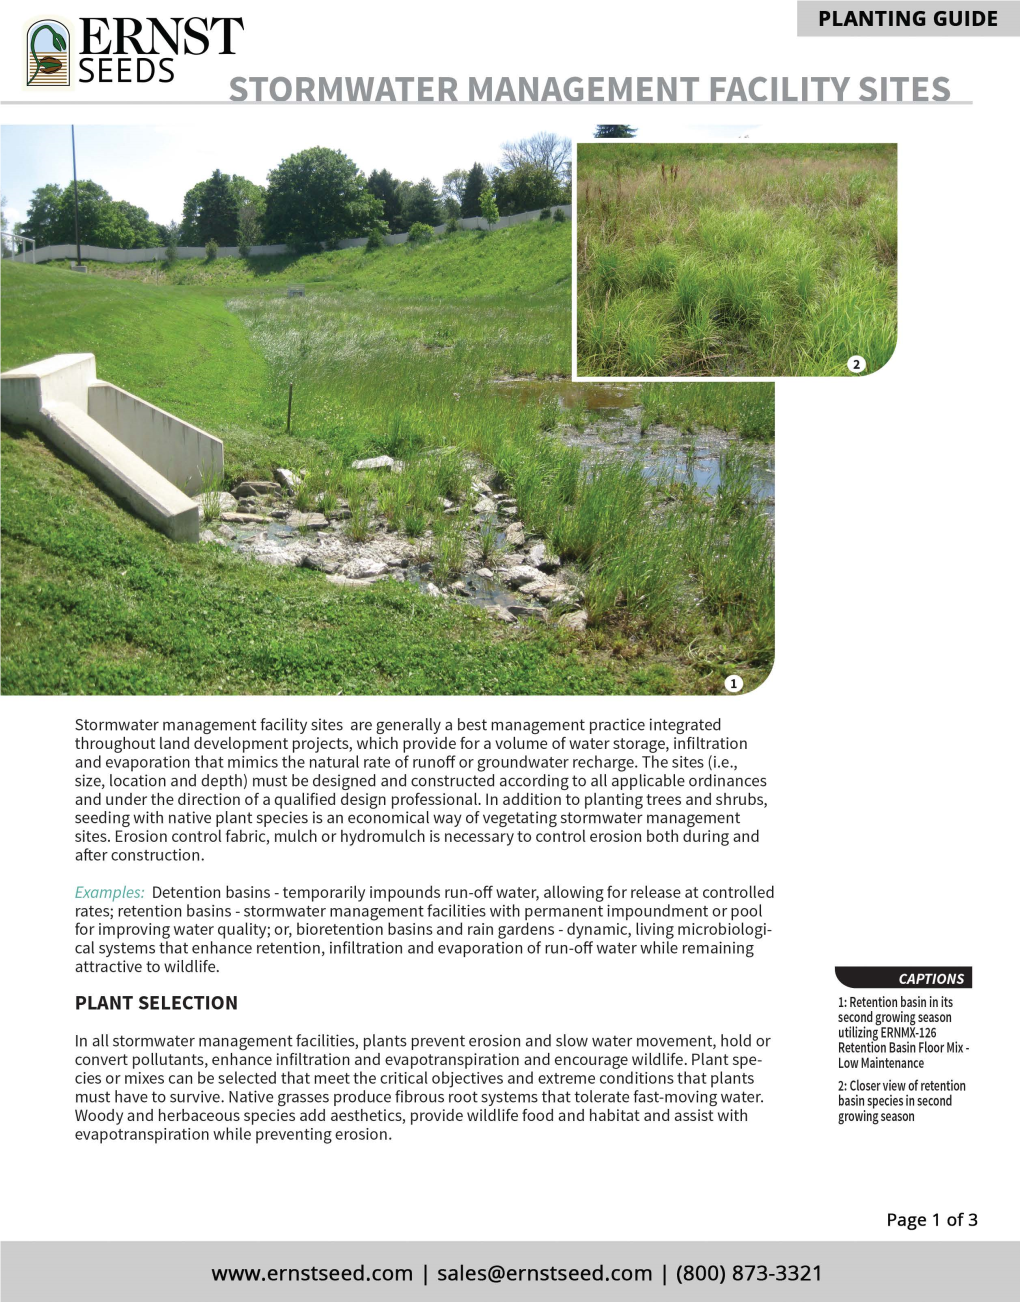 Stormwater Management Printable Planting Guide